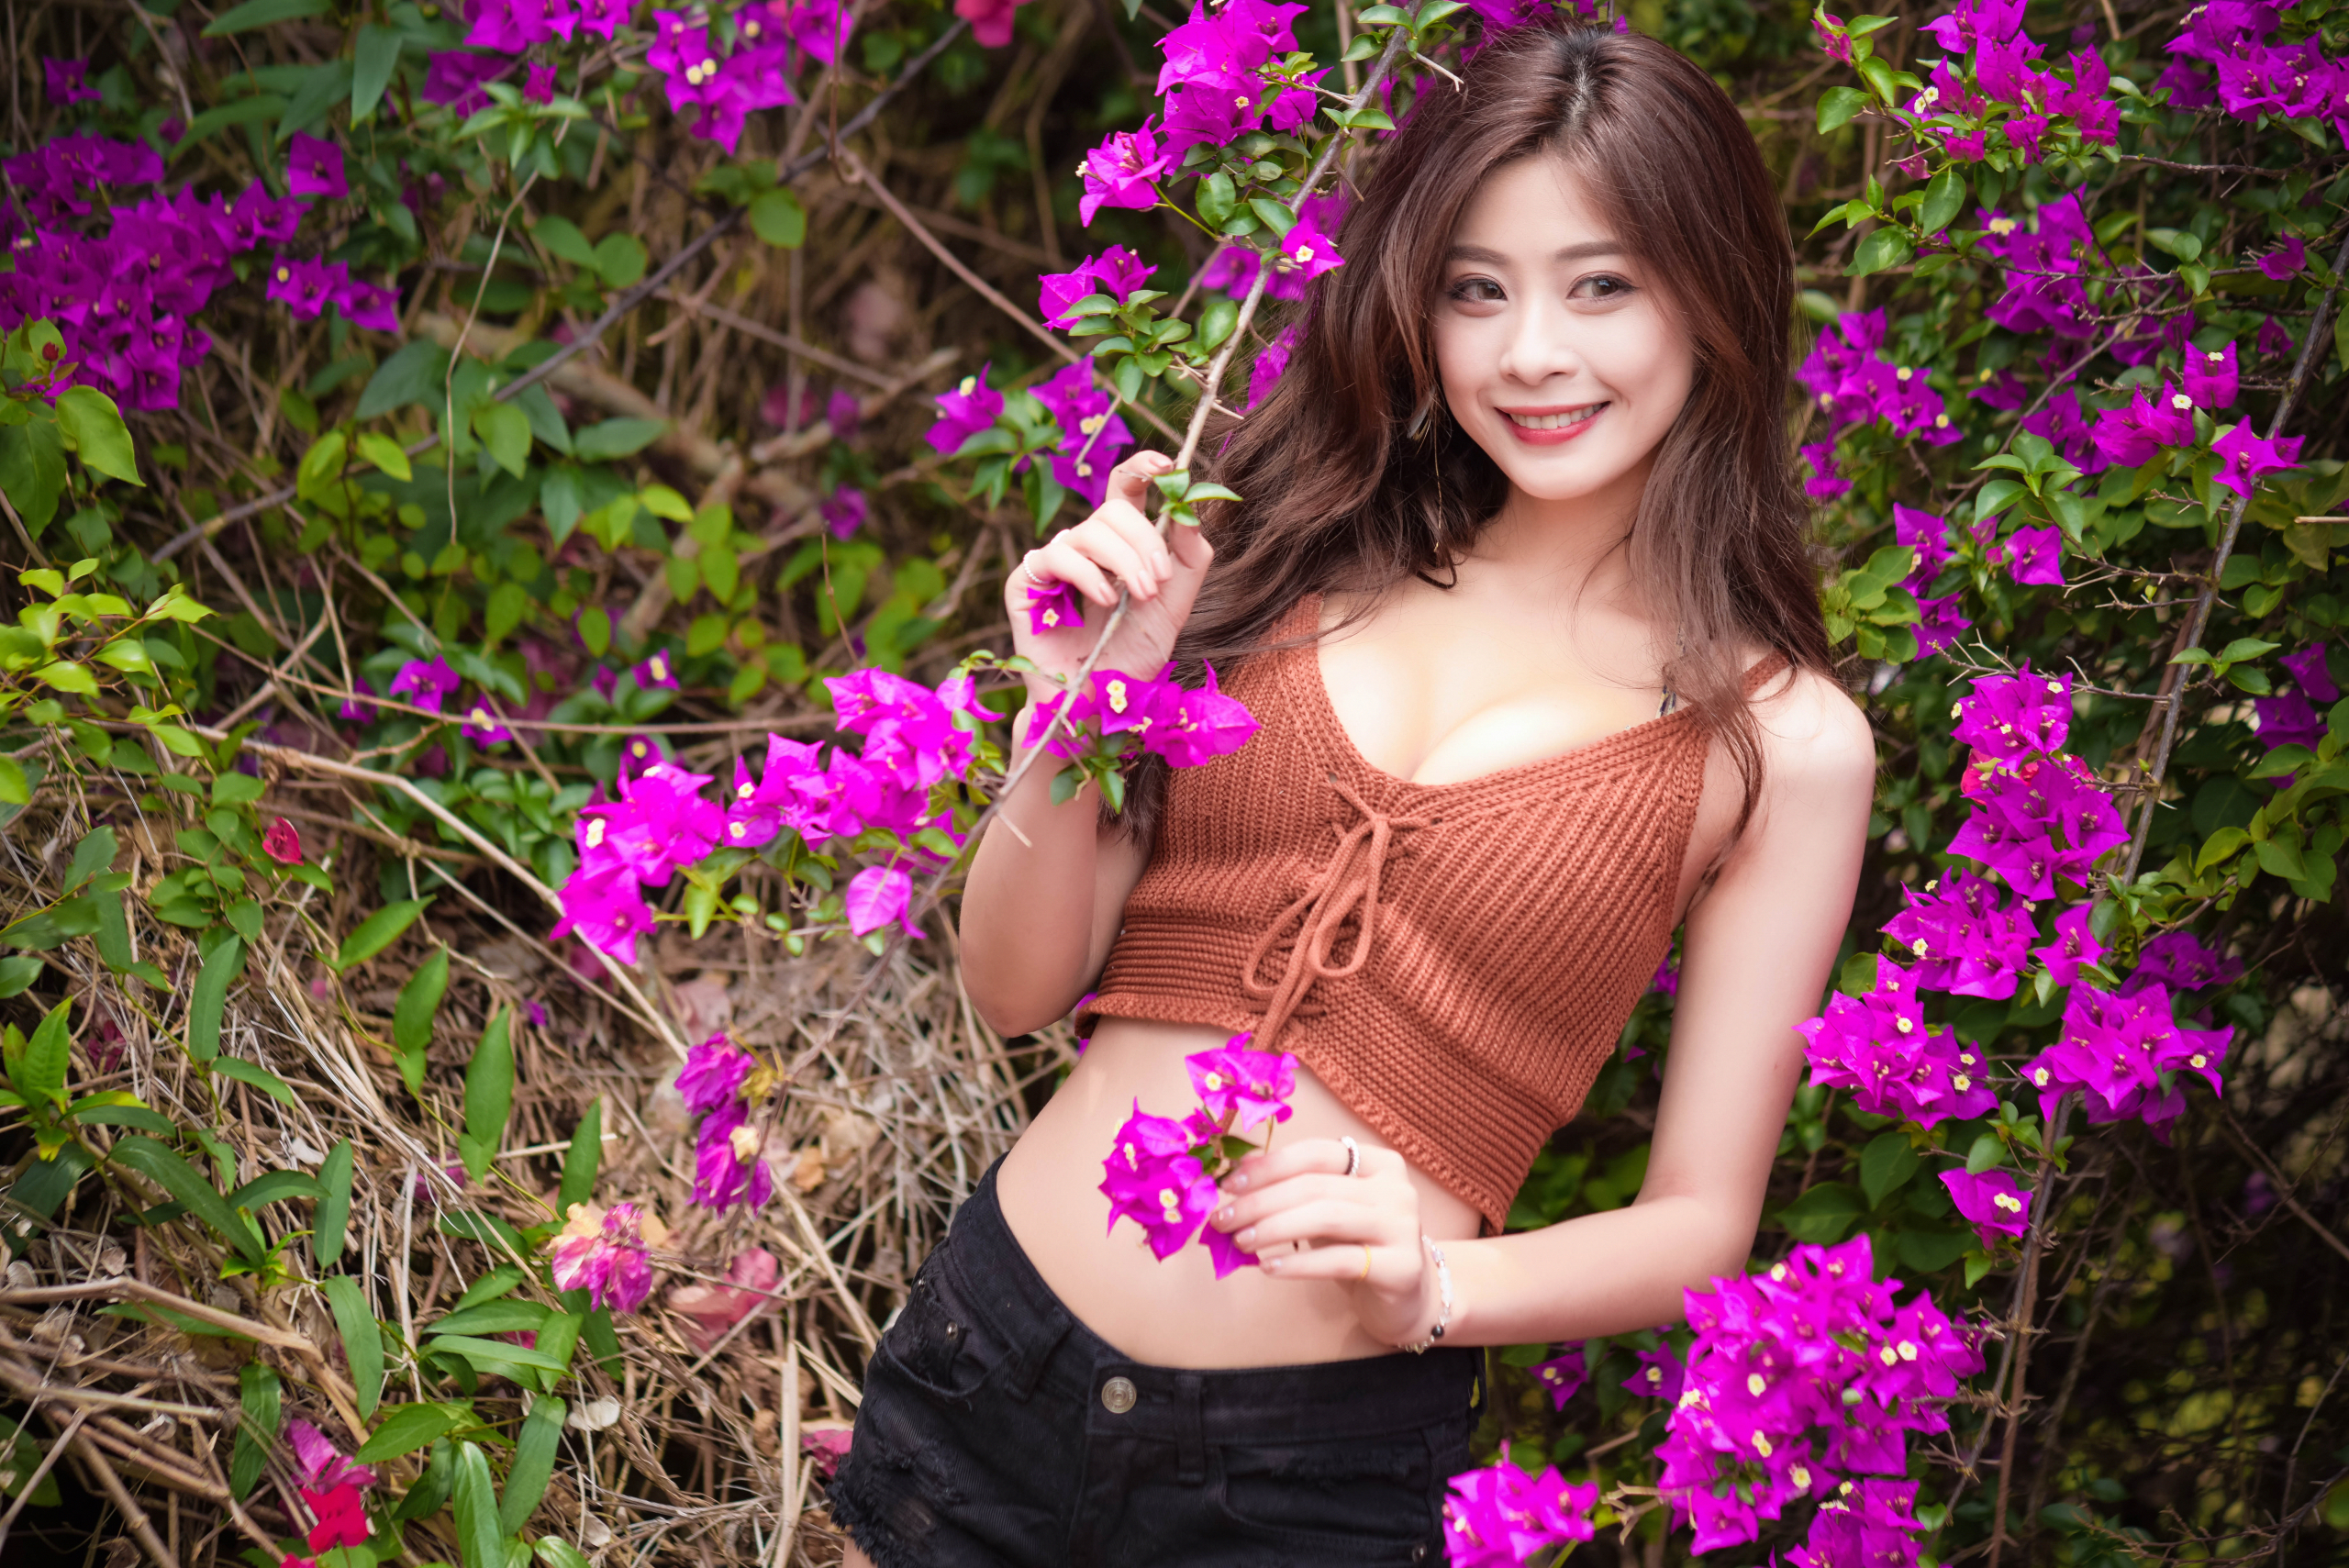 PinQ Women Model Brunette Asian Knit Fabric Crop Top Looking At The Side Smiling Flowers Outdoors Wo 2560x1709